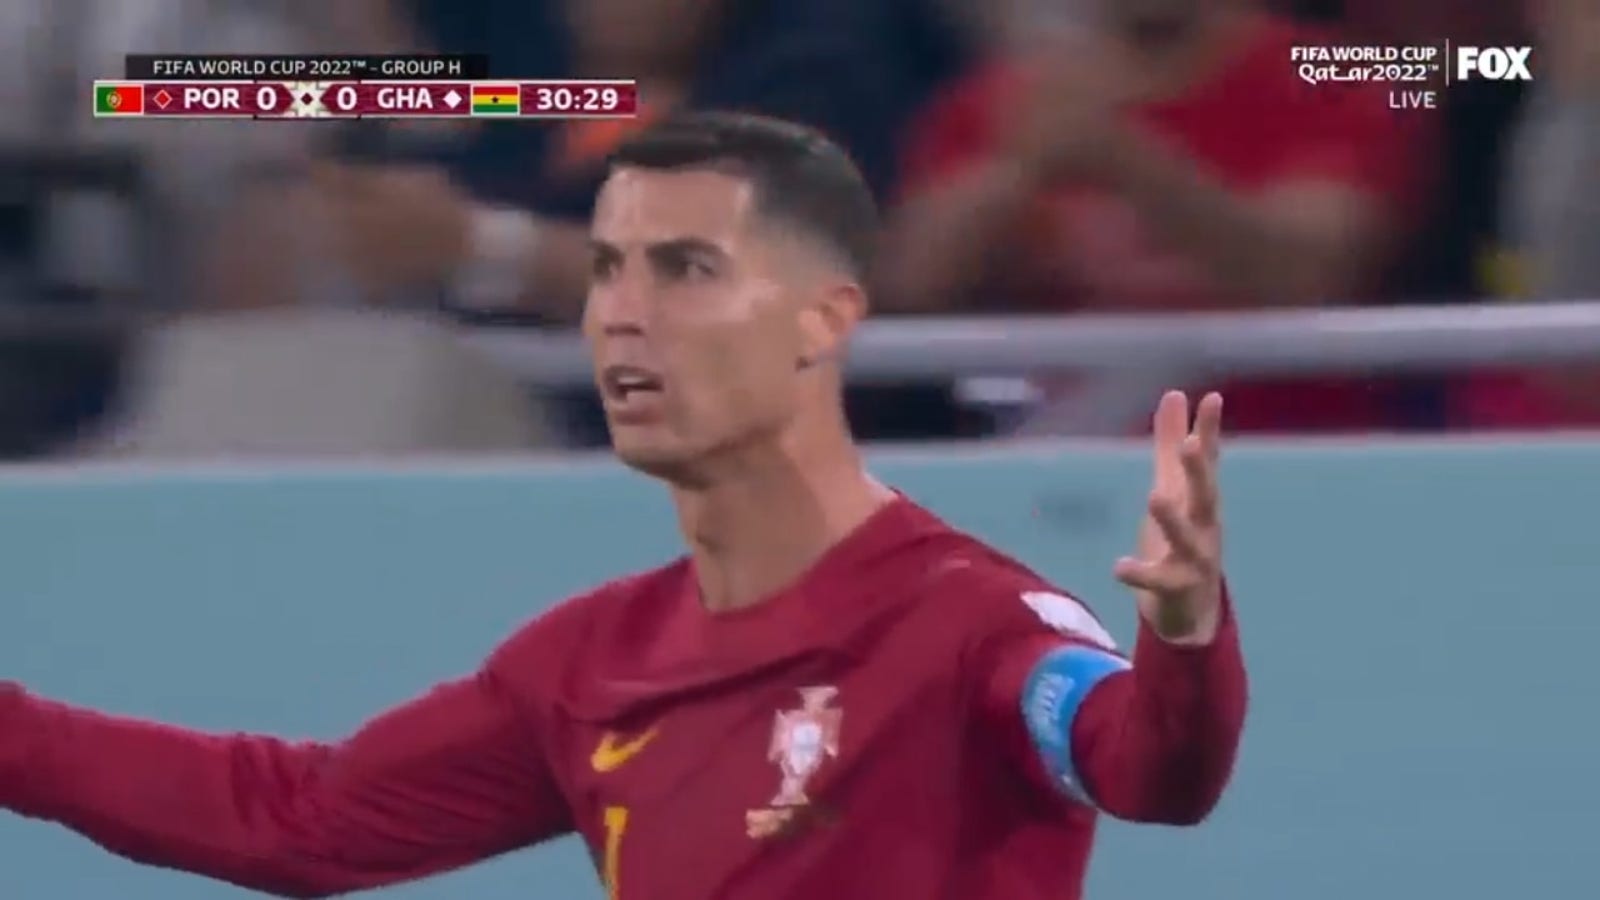 Cristiano Ronaldo's goal against Ghana was ruled out by a foul